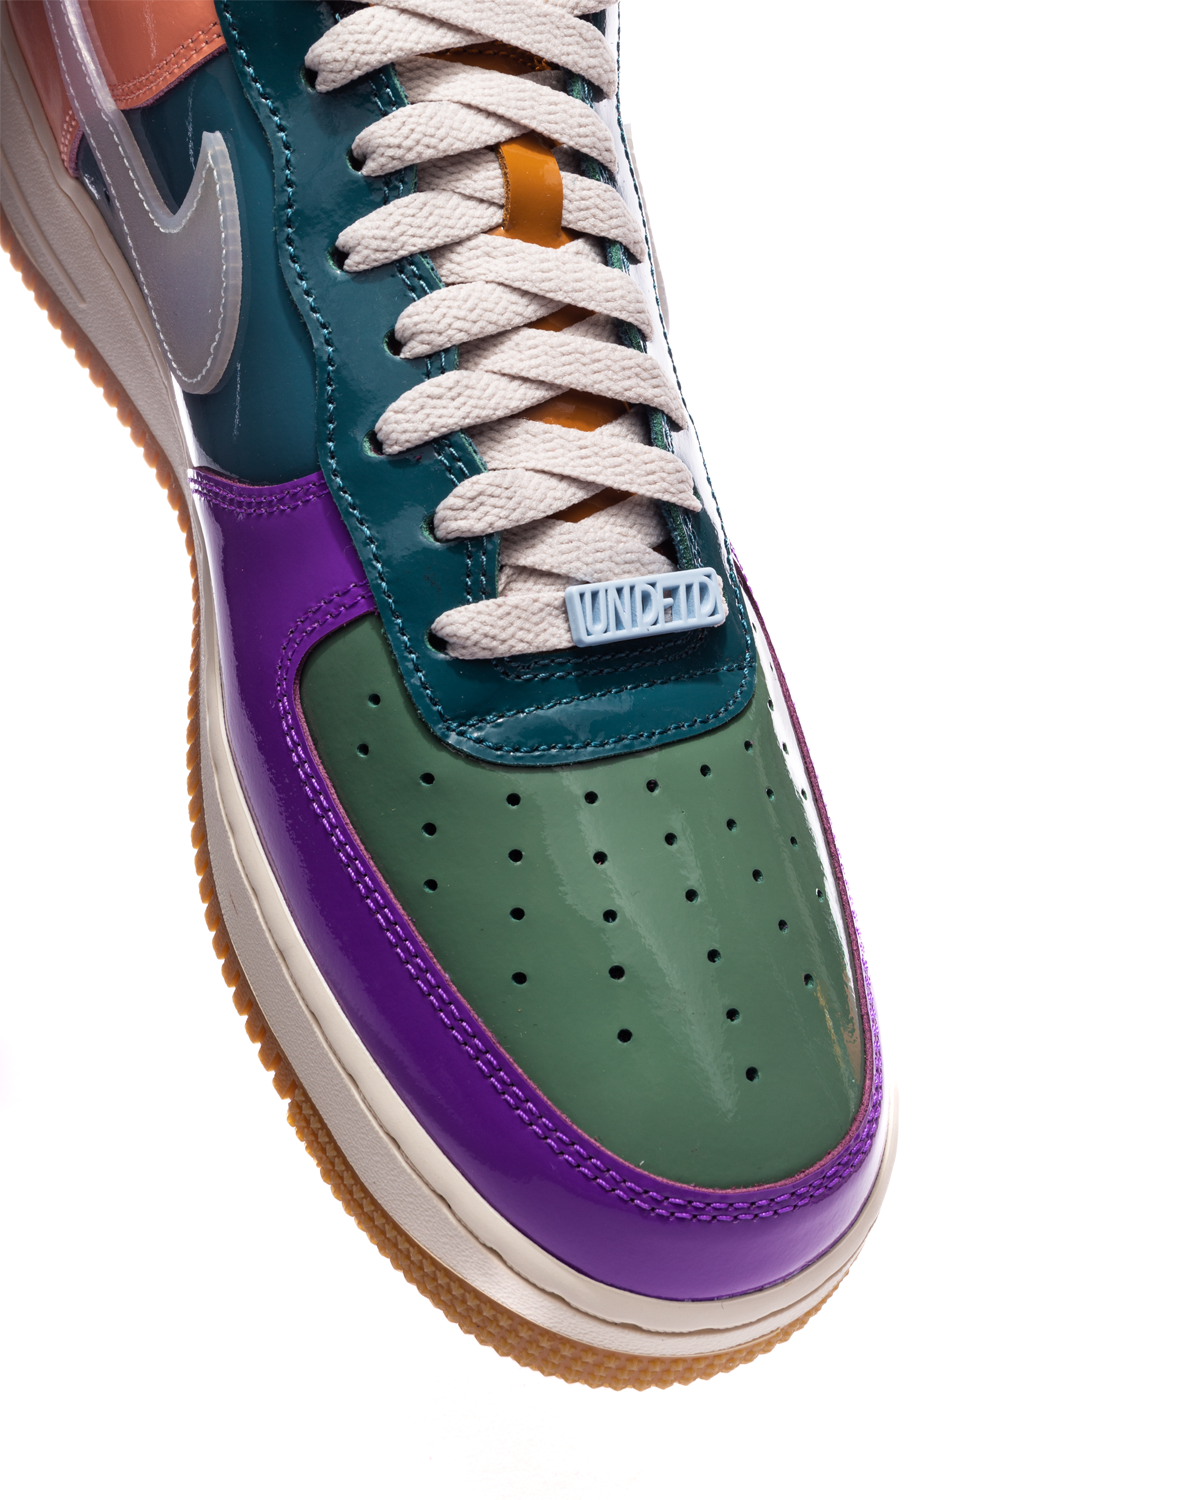 UNDEFEATED x Air Force 1 Low Wild Berry/Celestine Blue